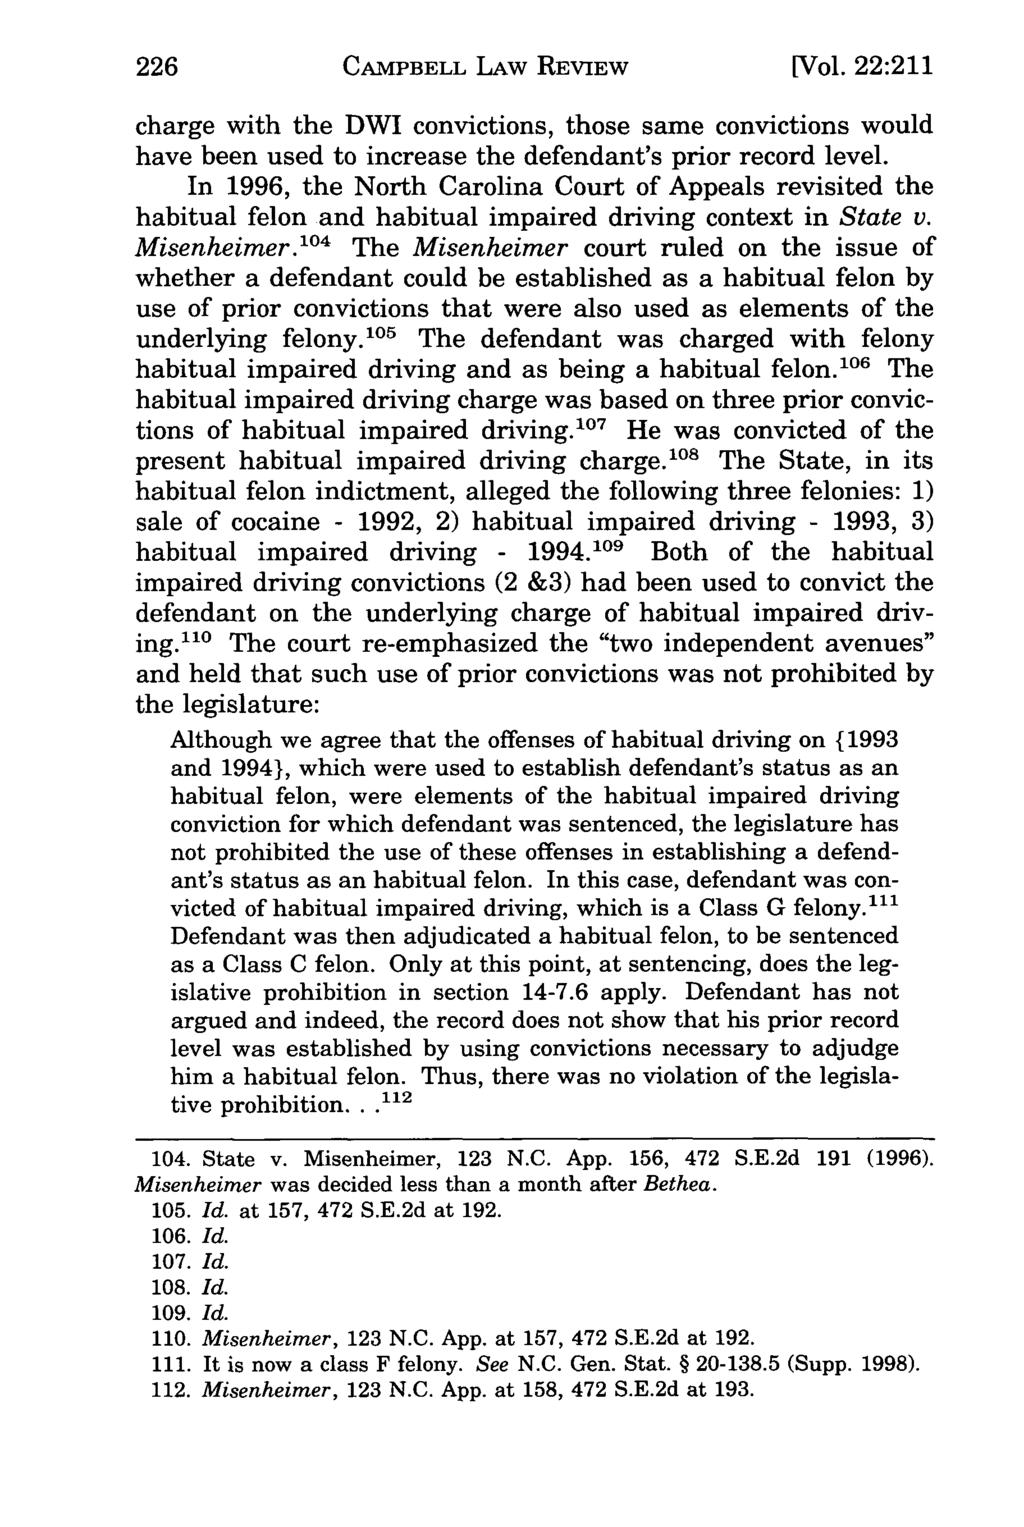 226 Campbell Law Review, Vol. 22, Iss. 1 [1999], Art. 7 CAMPBELL LAW REVIEW [Vol.